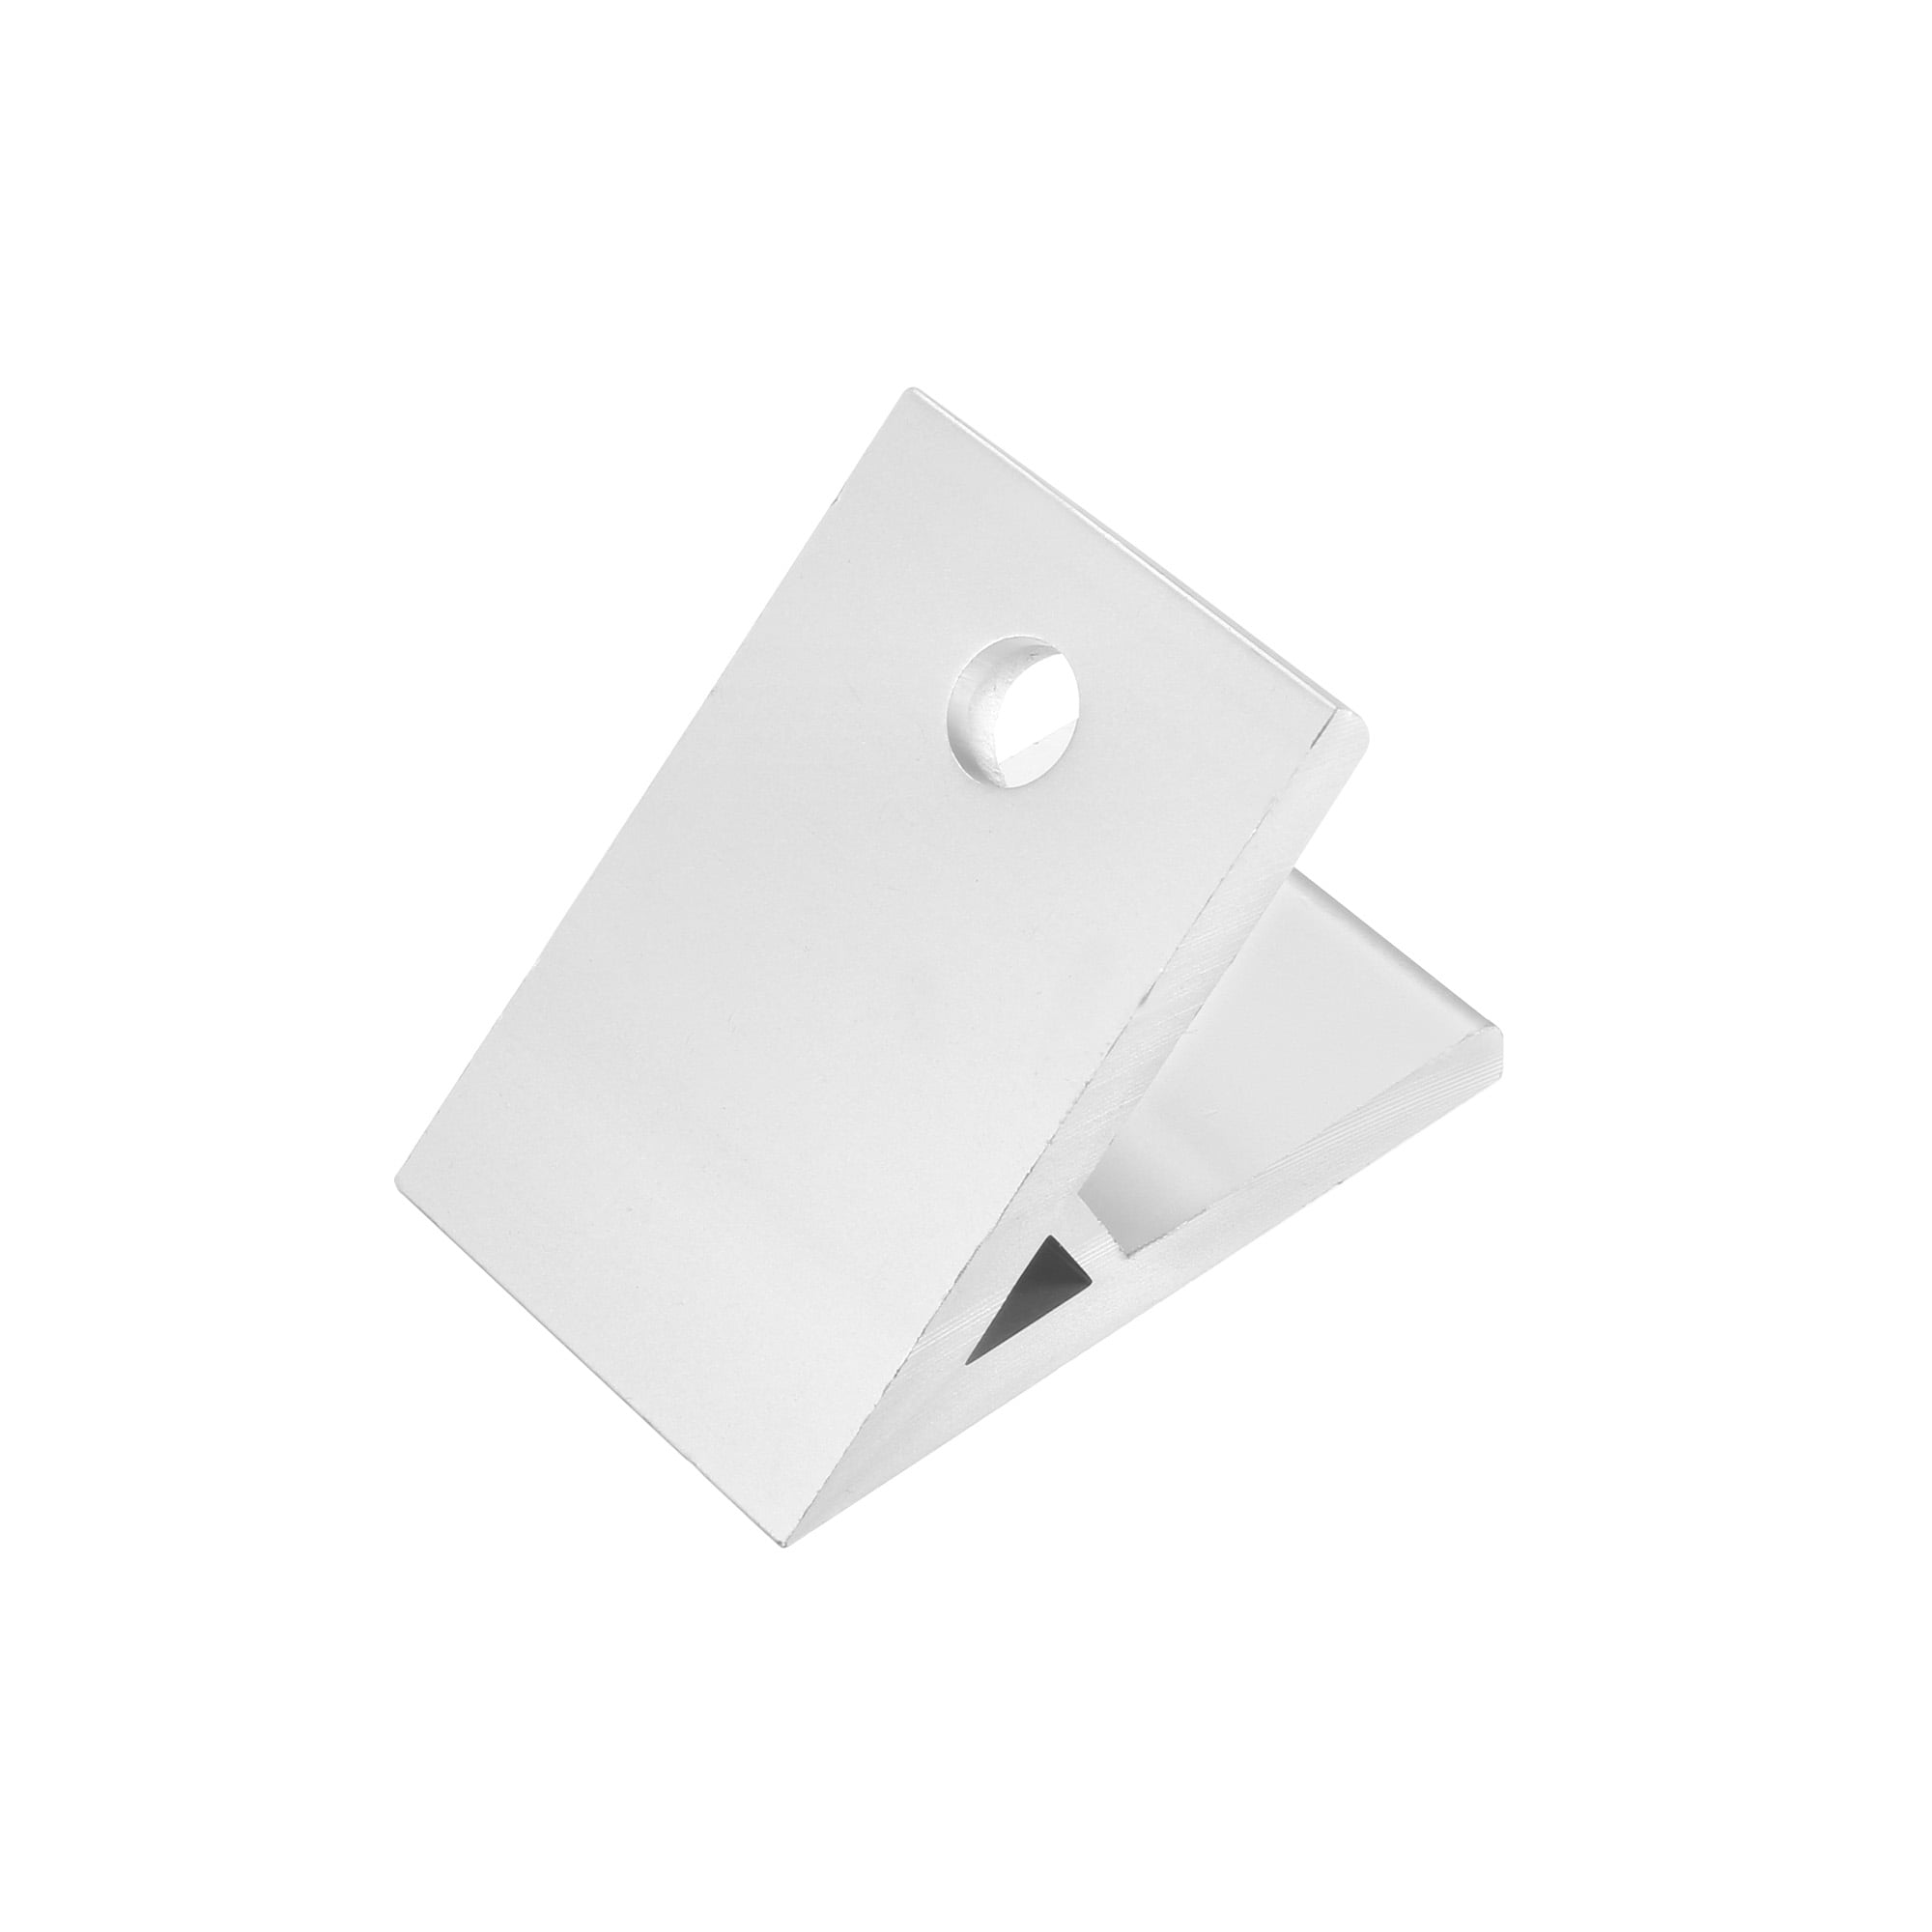 PZRT 2pcs 135 Degree Angle 2020 Aluminum Corner Brackets Profile Corner Joint Connectors Corner Braces with Mounting Screws and Nuts 